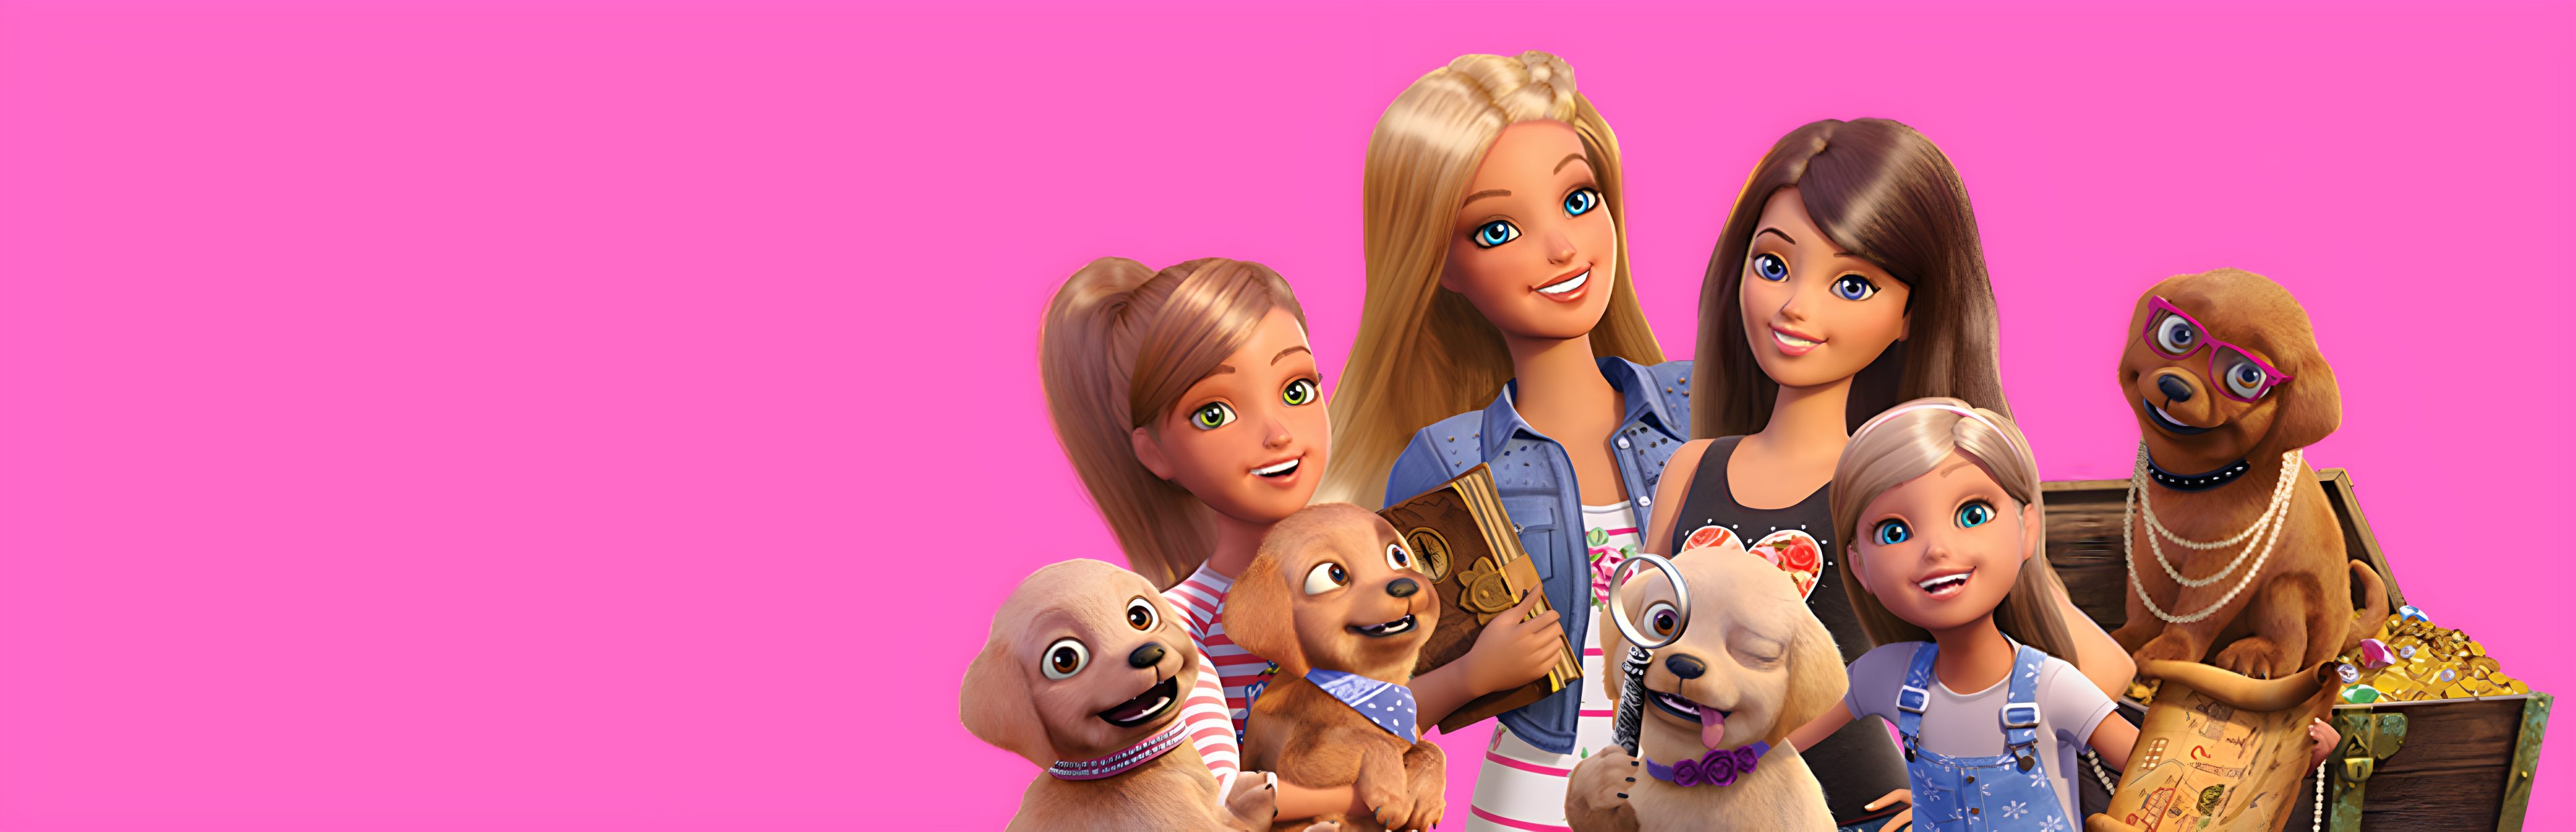 Barbie & Her Sisters: Puppy Rescue